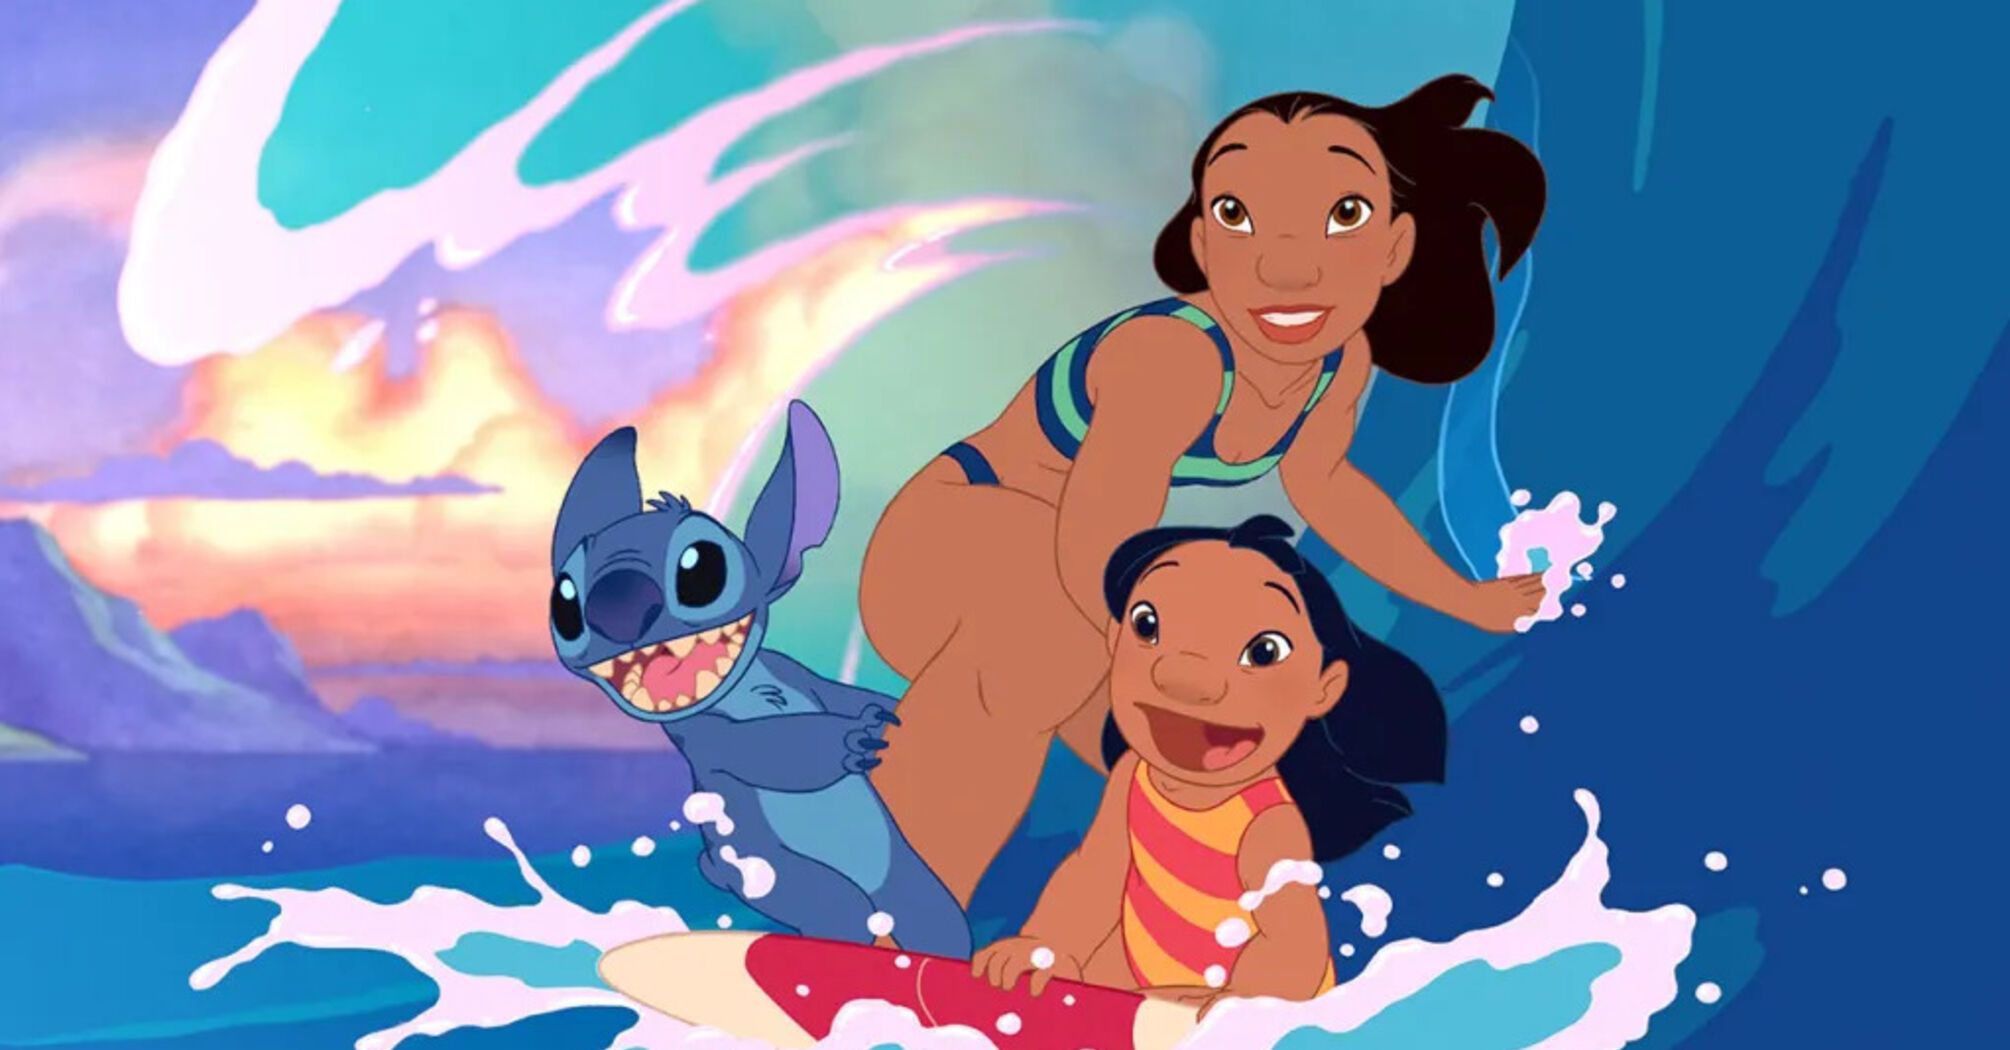 5 Animated Disney Movies From the 2000s